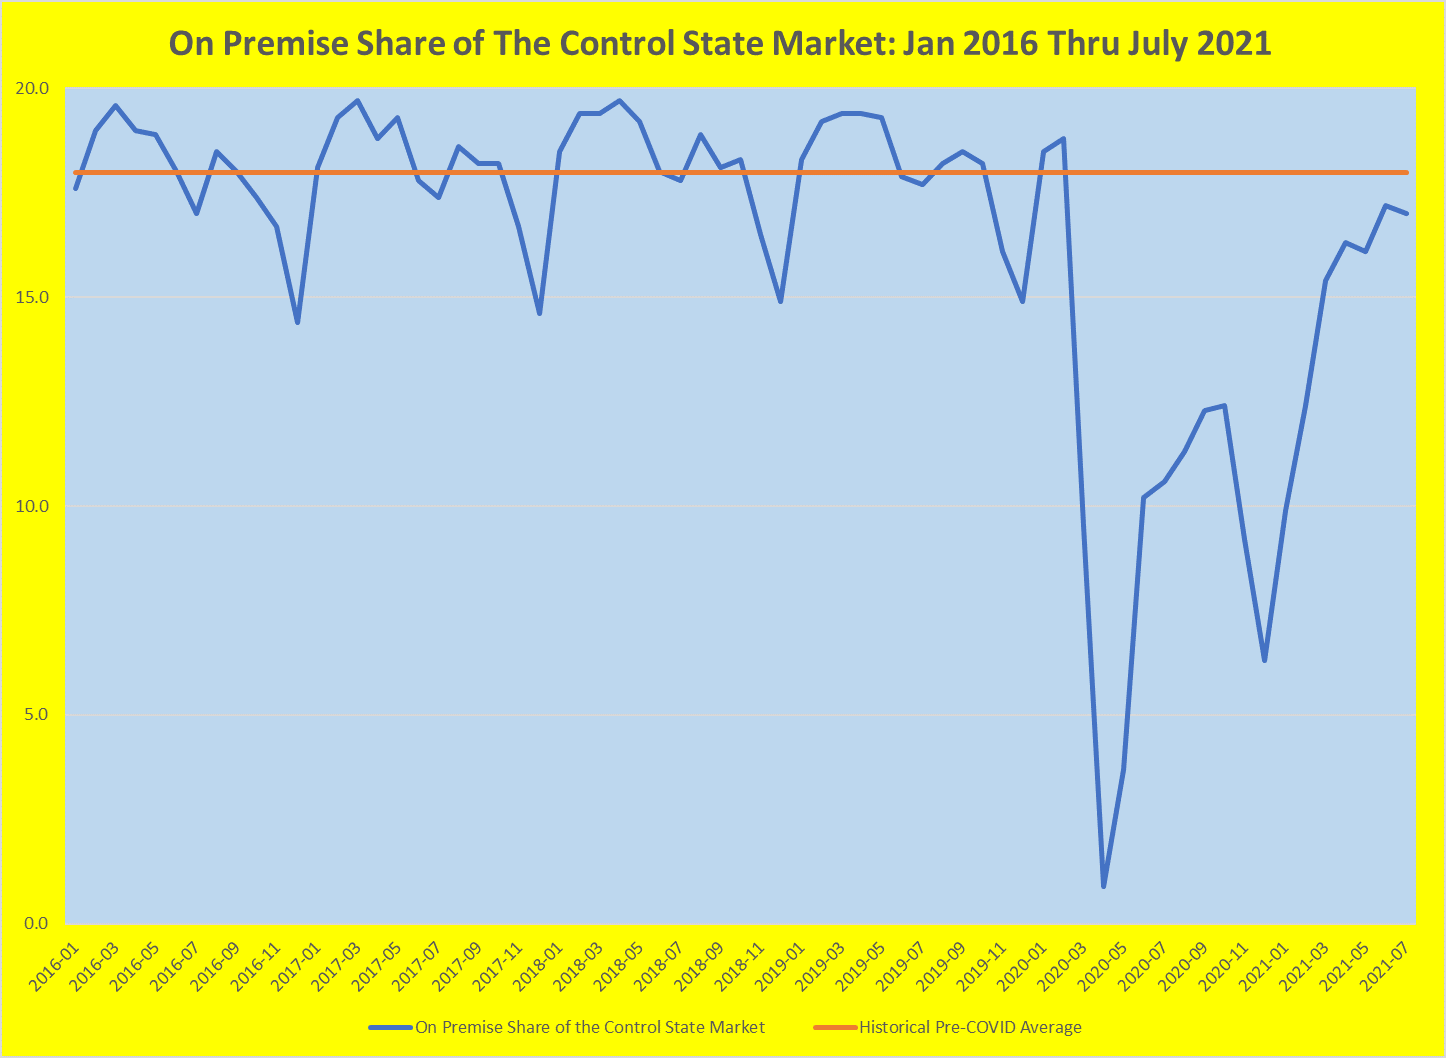 On Premise Share of the Control State Market:  Jan 2016 thru July 2021